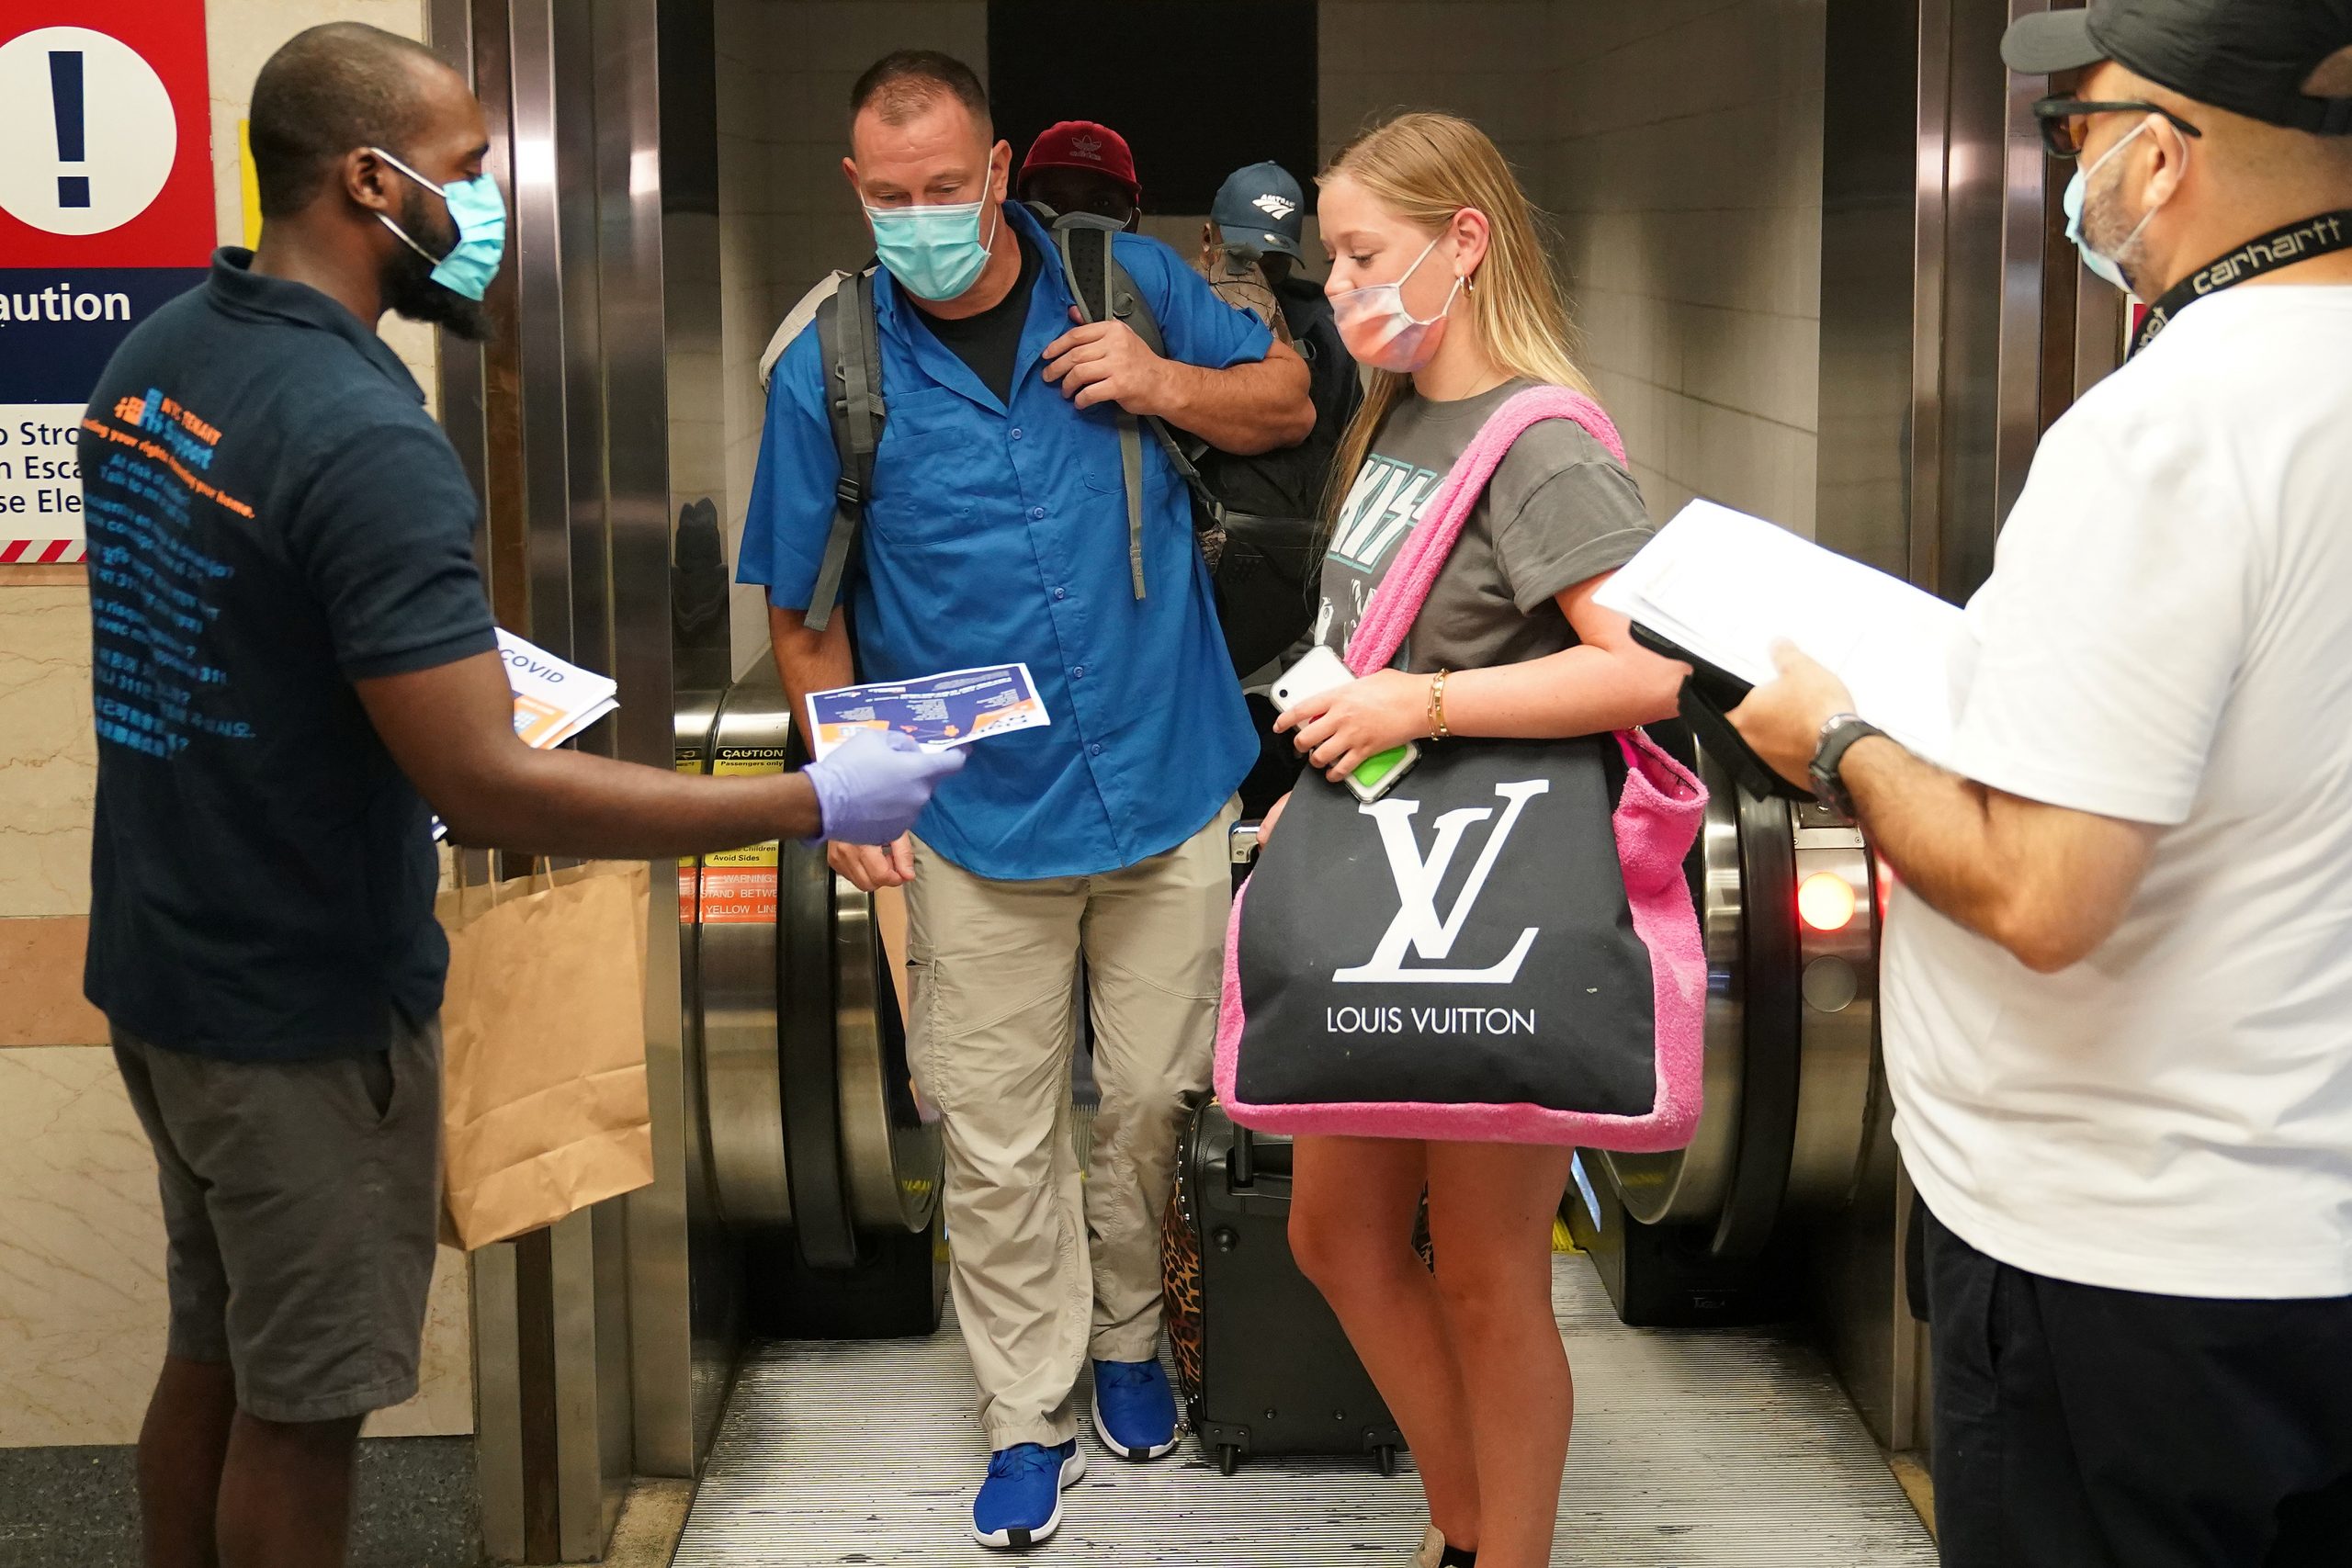 Quarantine ‘Checkpoint’ Opens at New York City’s Penn Station to